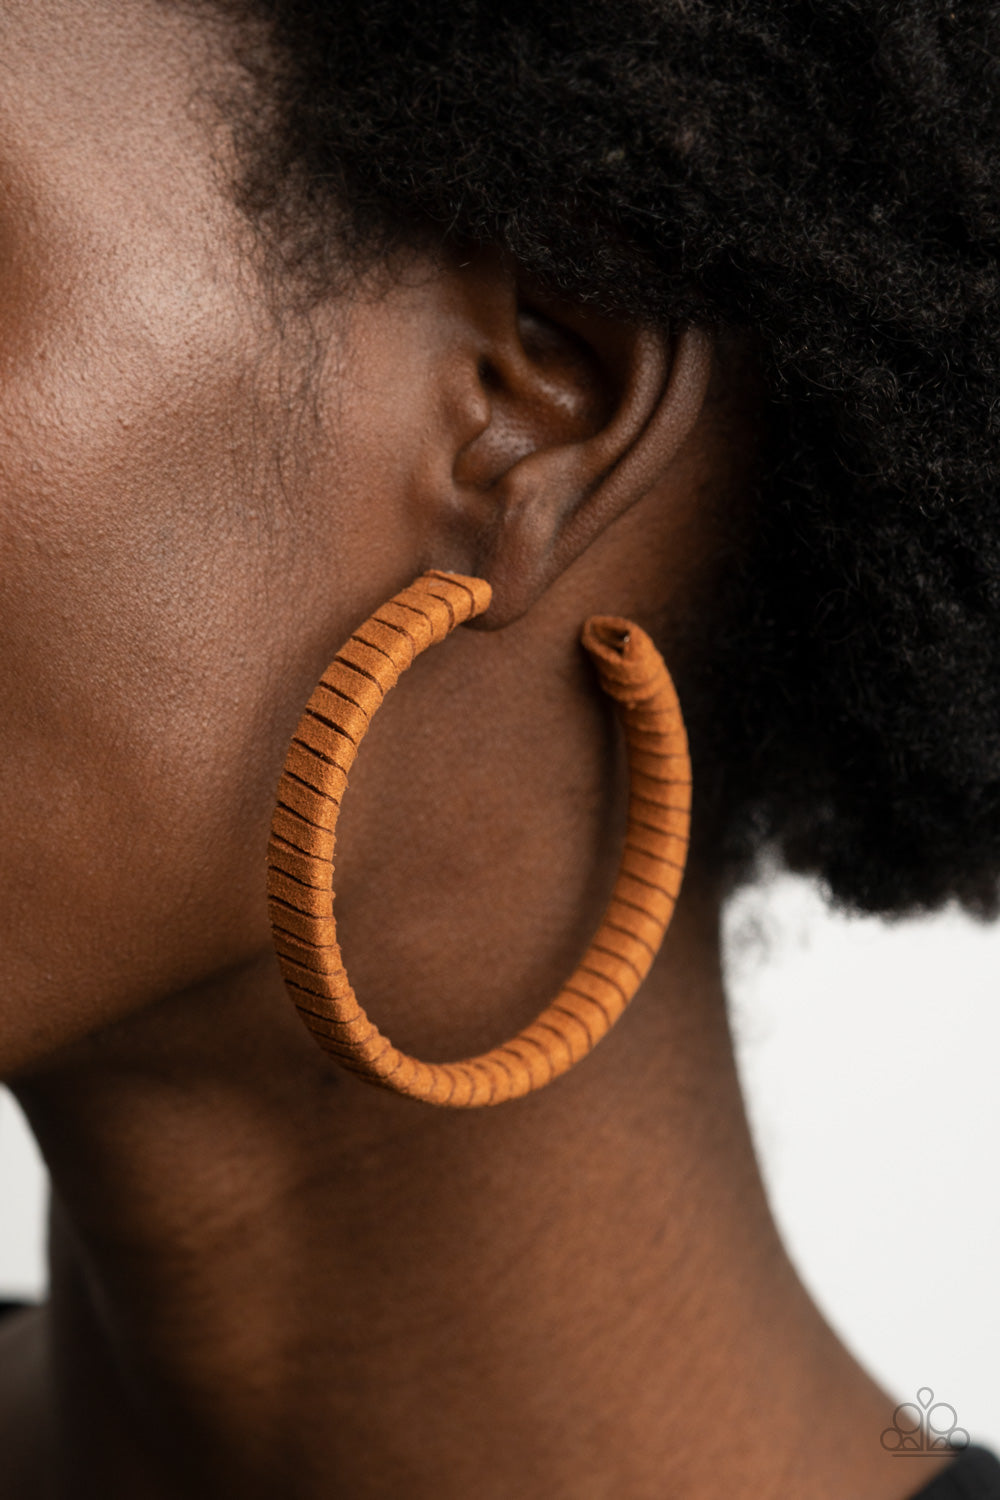 Suede Parade Brown Hoop Earring - Paparazzi Accessories  Tan suede cording wraps around an oversized hoop, creating an earthy pop of color. Earring attaches to a standard post fitting. Hoop measures approximately 2 1/4" in diameter.  All Paparazzi Accessories are lead free and nickel free!  Sold as one pair of hoop earrings.